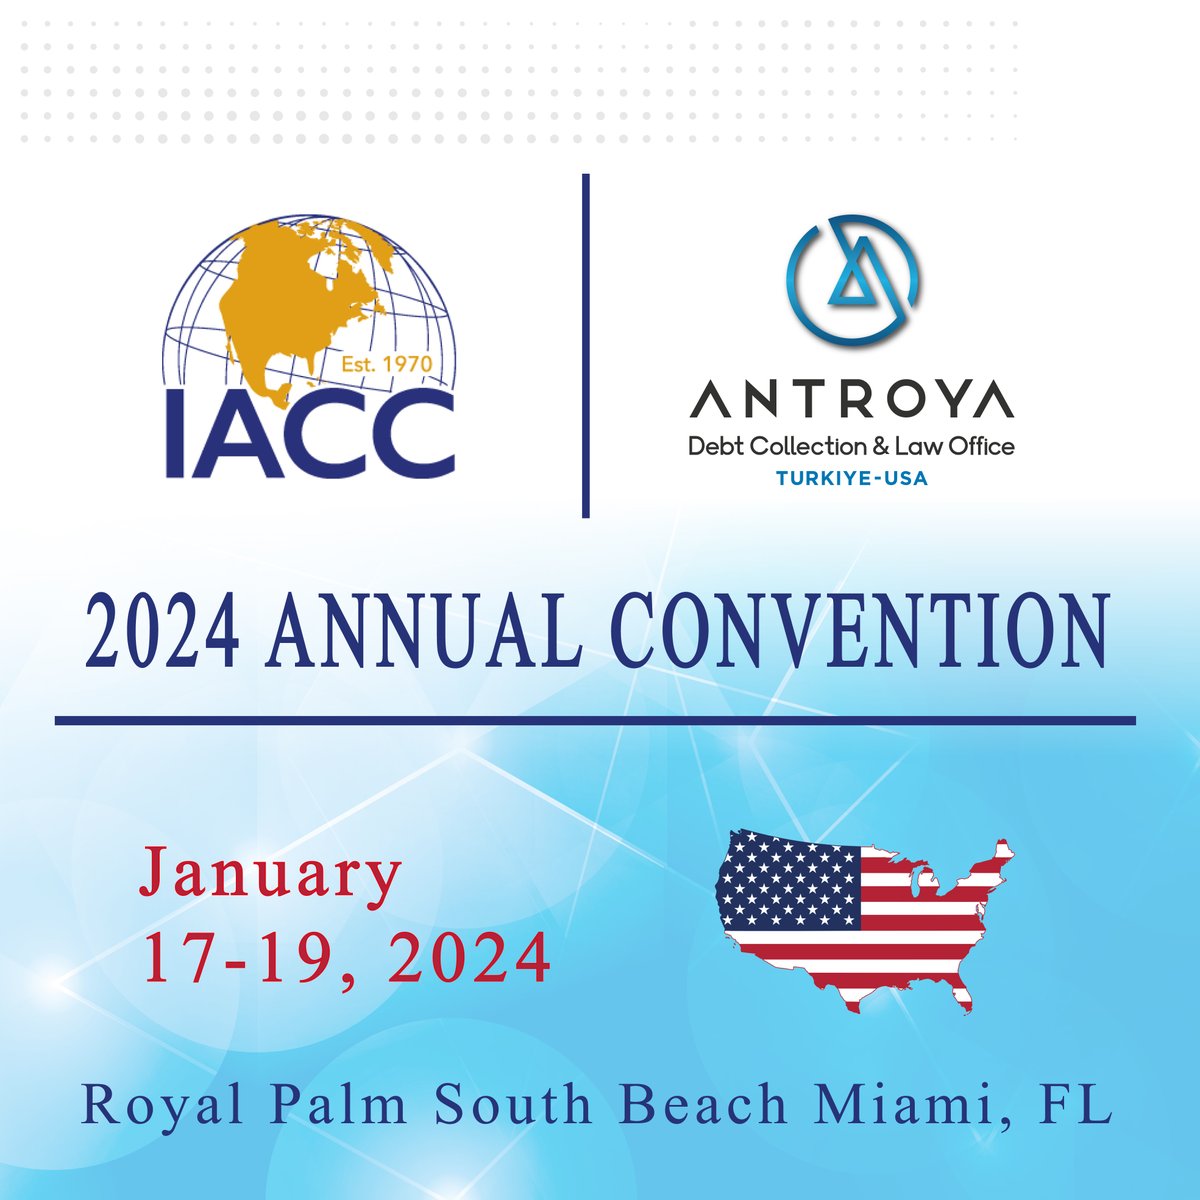 Excited to be part of the IACC Annual Meeting 2024! Looking forward to fostering collaborations in the commercial debt collection sector with our partners and friends. 🌐 #IACC2024 #Collaboration #DebtCollection